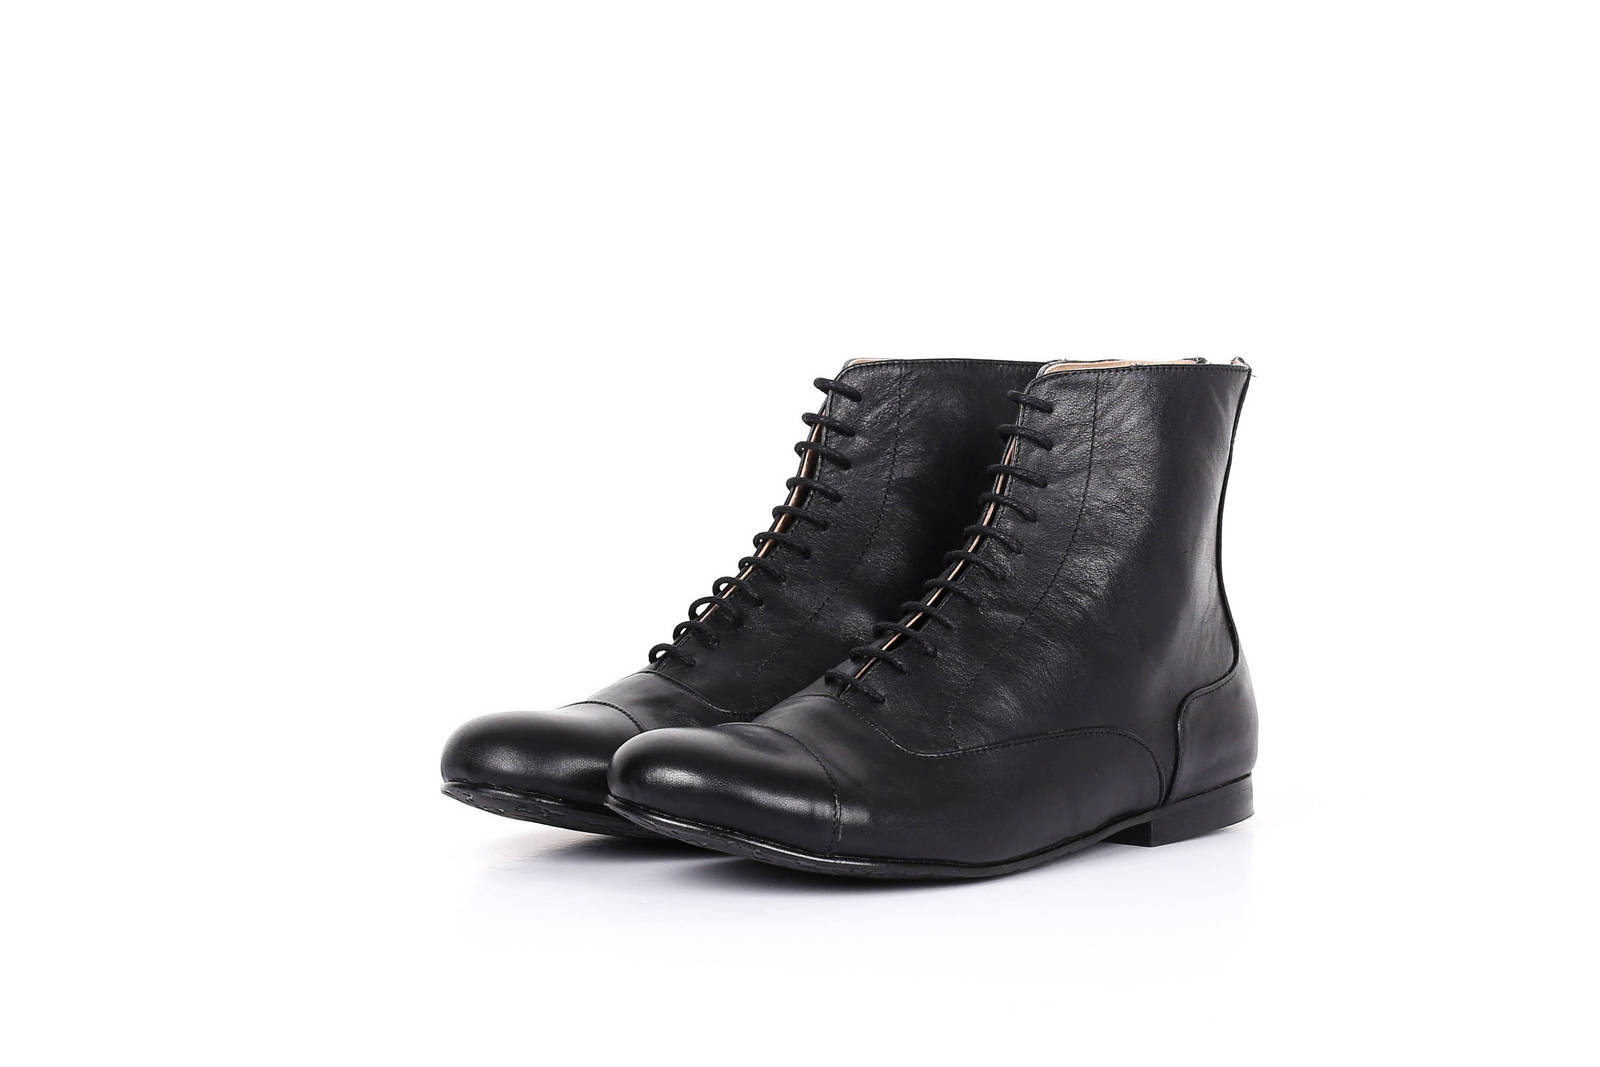 Perfect Wear Black Balmoral,Cap Toe Premium Leather Women High Ankle Boots